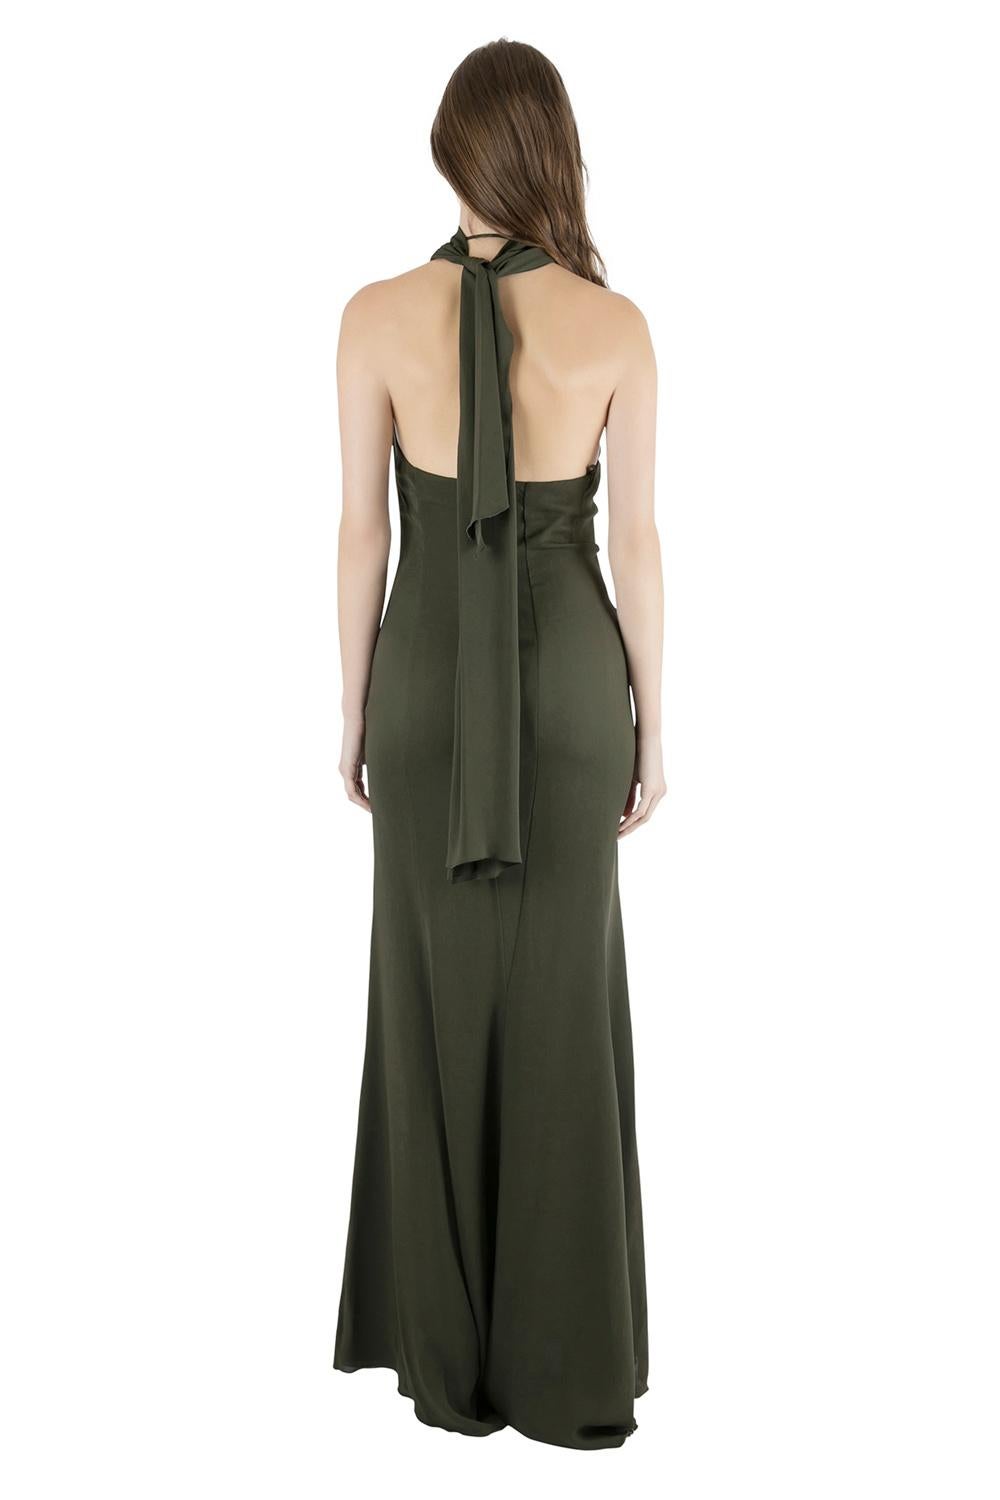 Grace mixed with fashion, you cannot go wrong with this Valentino dress. Offering both comfort and style, this maxi dress brings ruffles on the front and a halter neckline. You can pair it with high heel sandals and a small clutch.

Includes: The